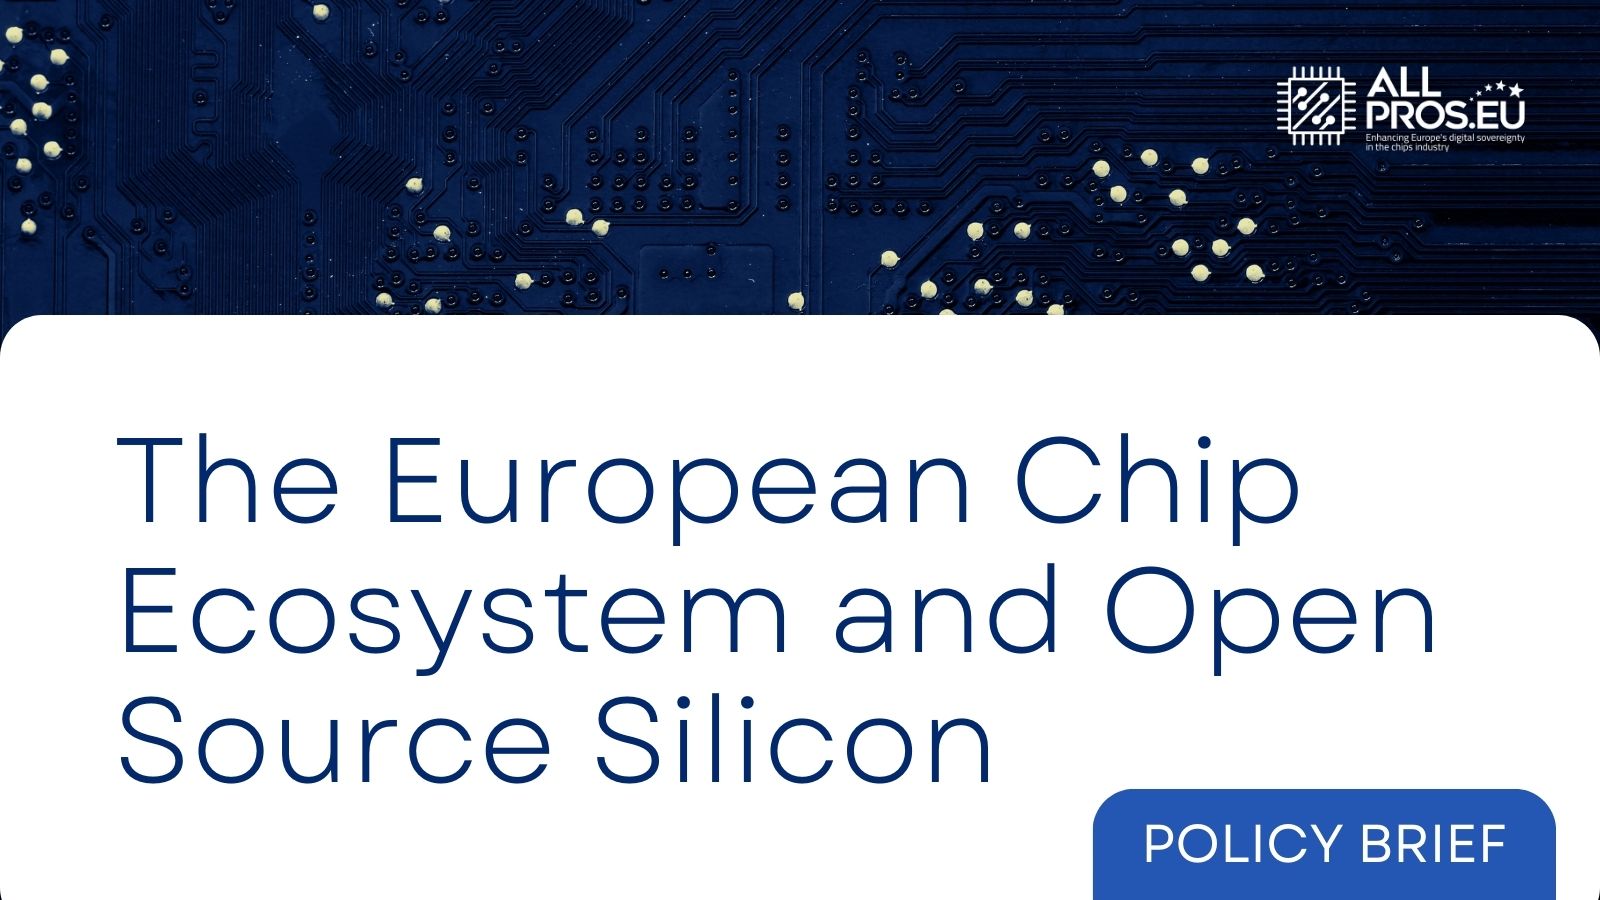 European chip ecosystem and open source silicon